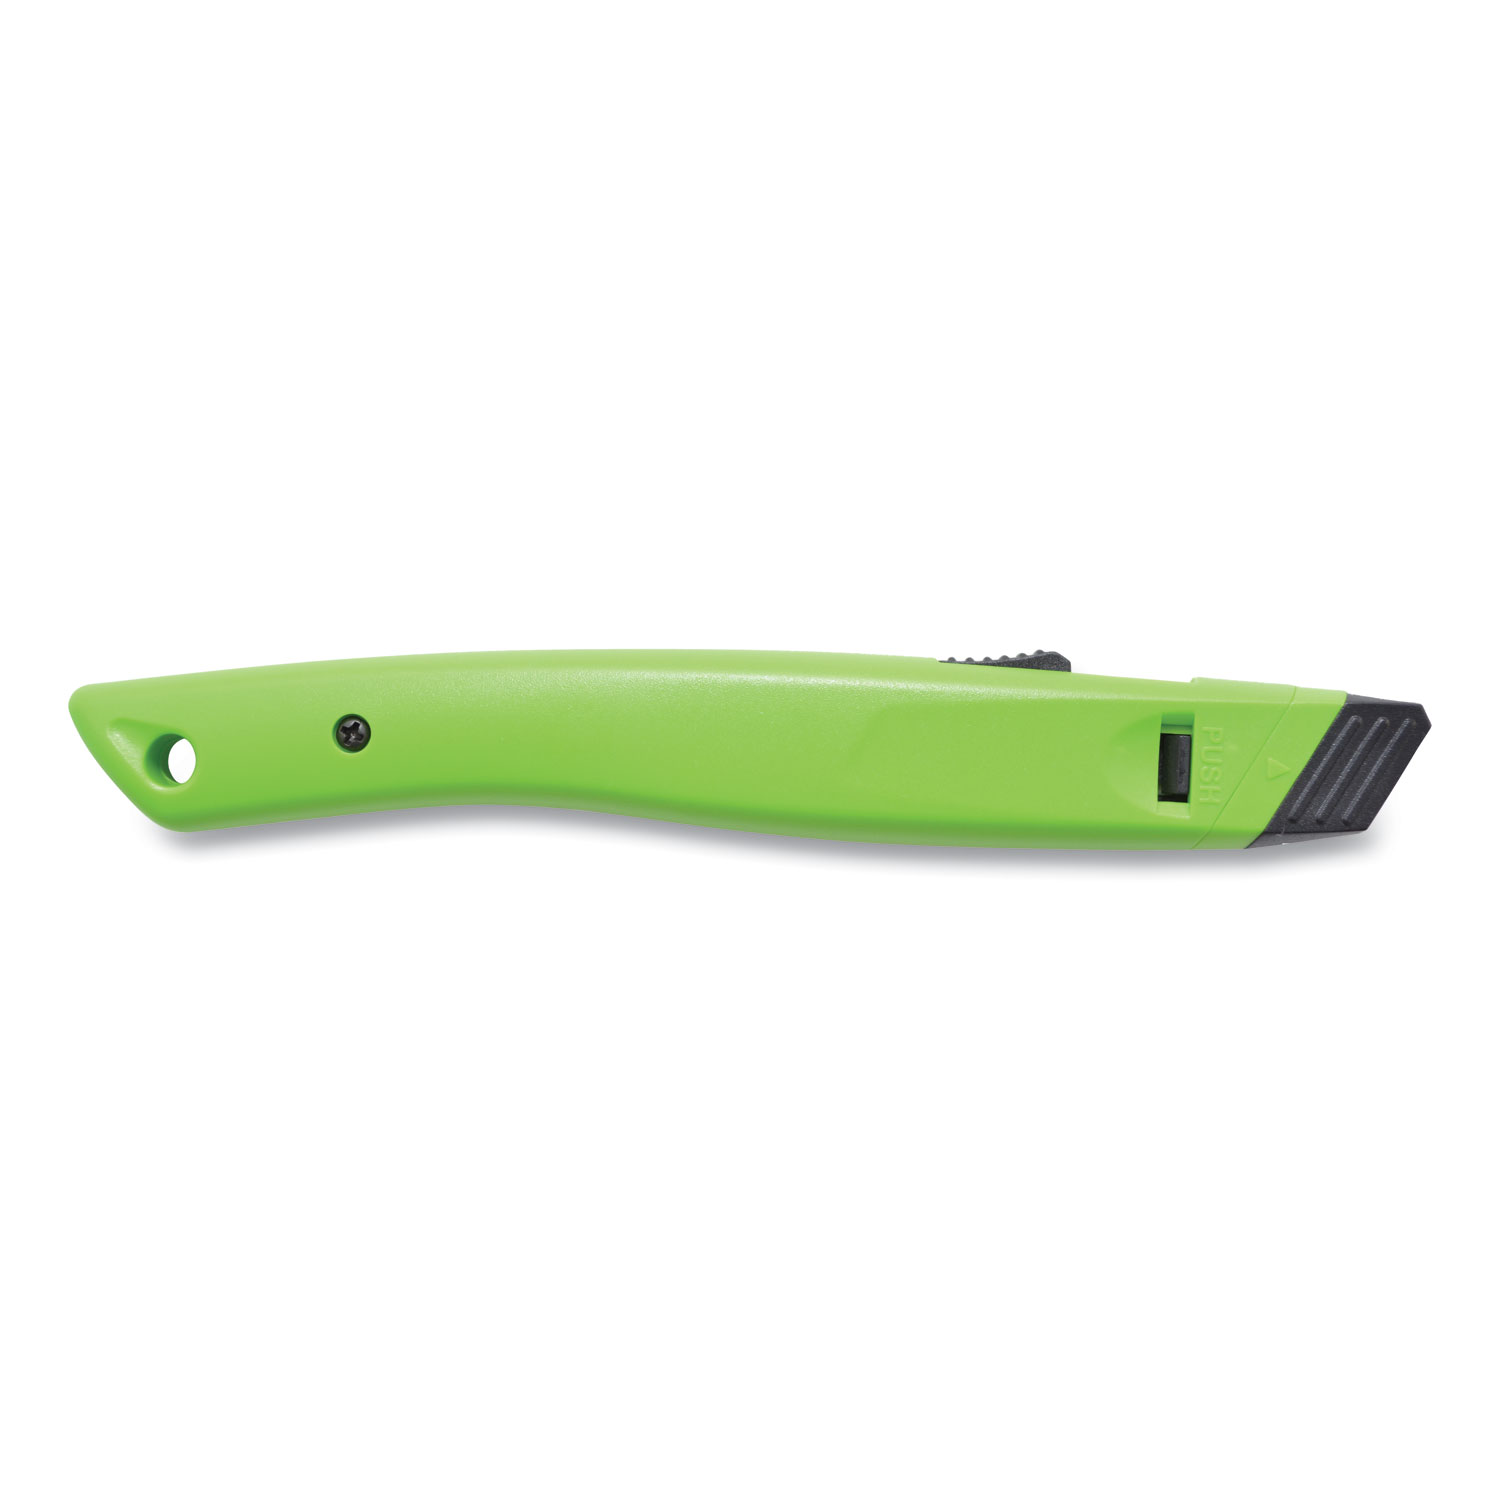 Safety Ceramic Blade Box Cutter, 0.5 Blade, 5.5 Plastic Handle, Green -  Pointer Office Products